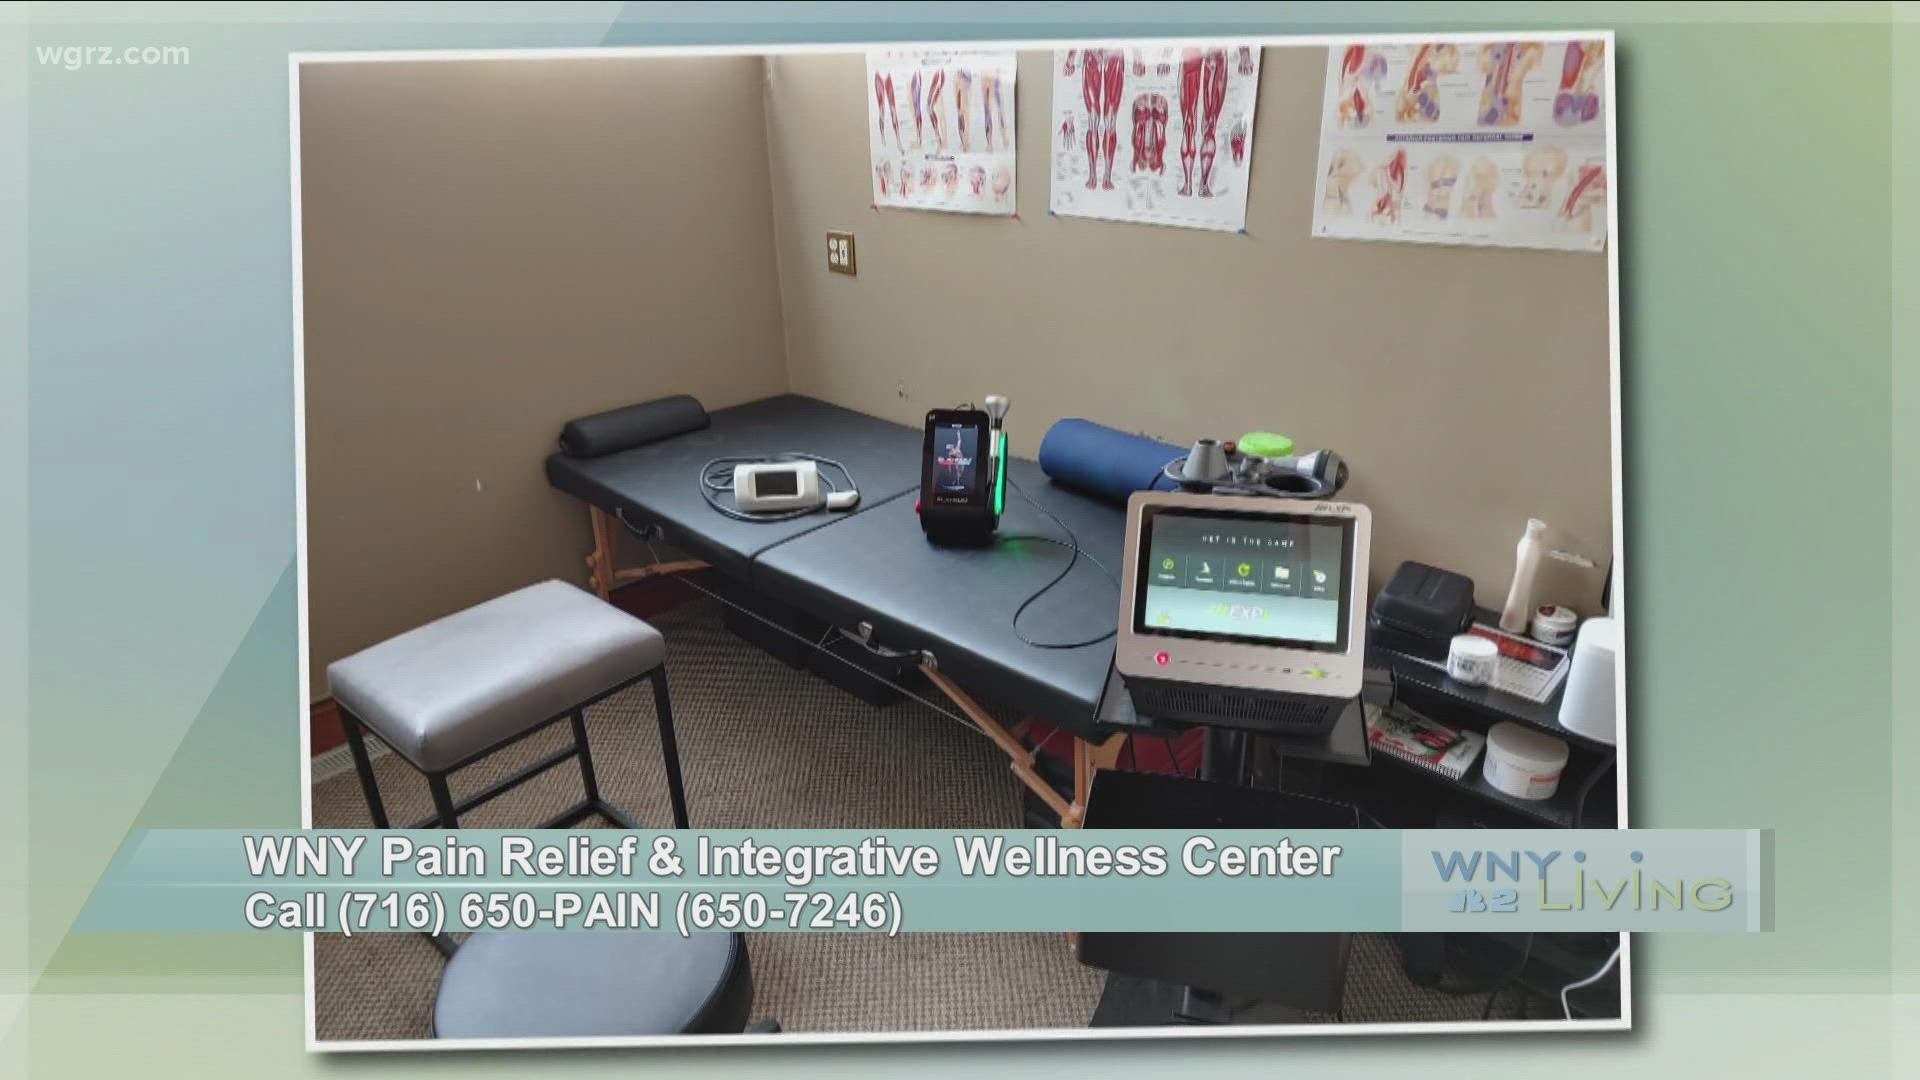 WNY Living - October 16 - WNY Pain Relief & Integrative Wellness Center (THIS VIDEO IS SPONSORED BY WNY PAIN RELIEF & INTEGRATIVE WELLNESS CENTER)